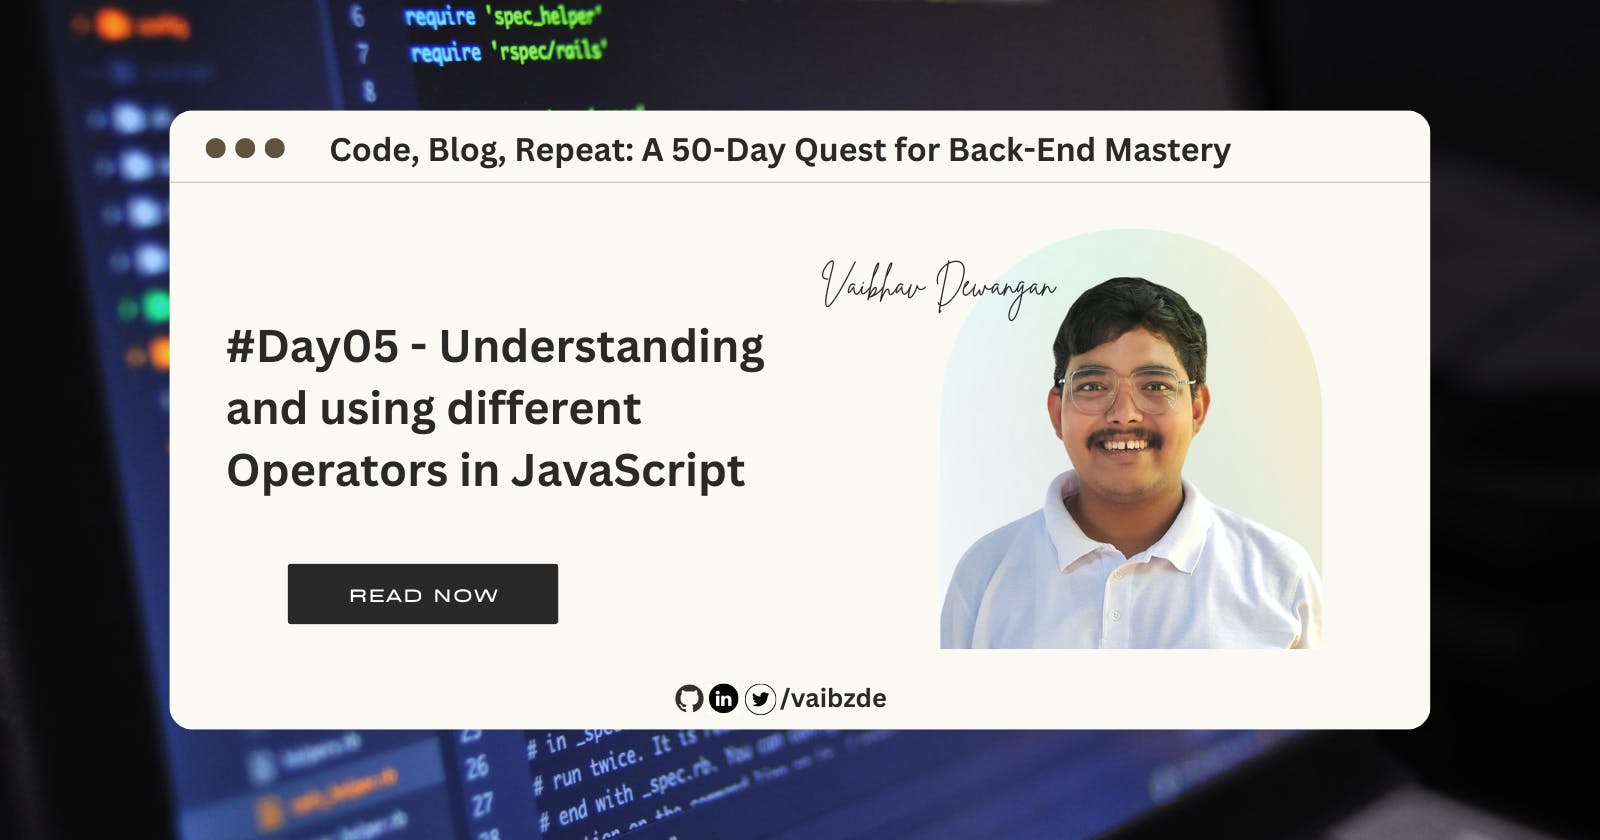 #Day05 - Understanding and using different Operators in JavaScript